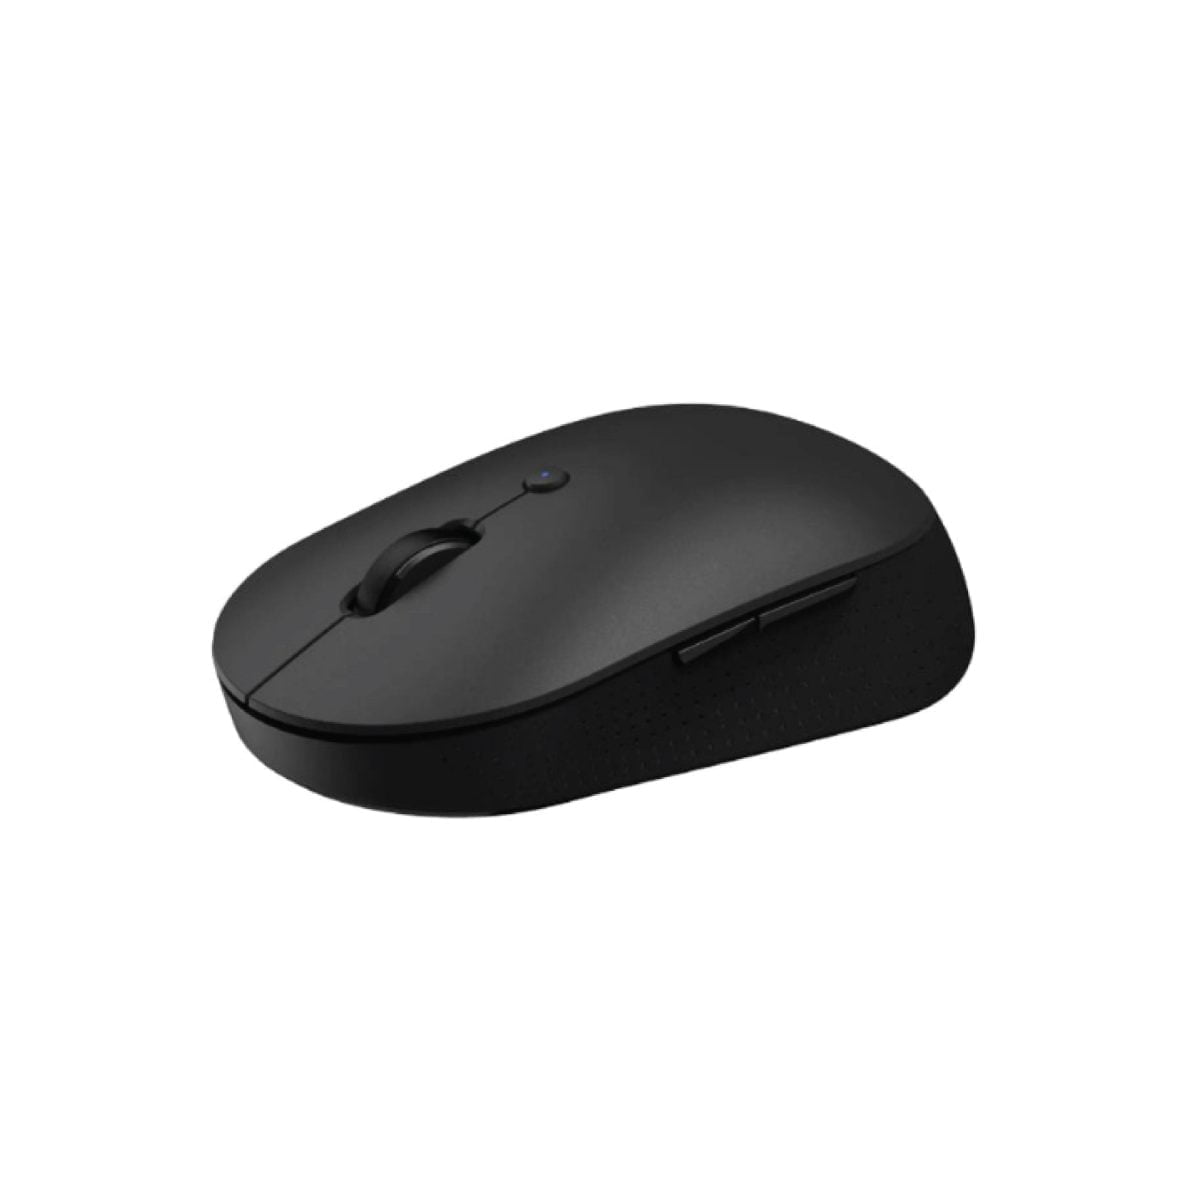 Eqwas 01 Scaled Xiaomi Bluetooth + 2.4Ghz Dual-Mode Connection, Which Can Be Switched Between Two Computers Freely, Silent Button Design, Don'T Worry About Disturbing Others Xiaomi Xiaomi Mi Dual Mode Wireless Mouse Silent Edition Black (1300Dpi)